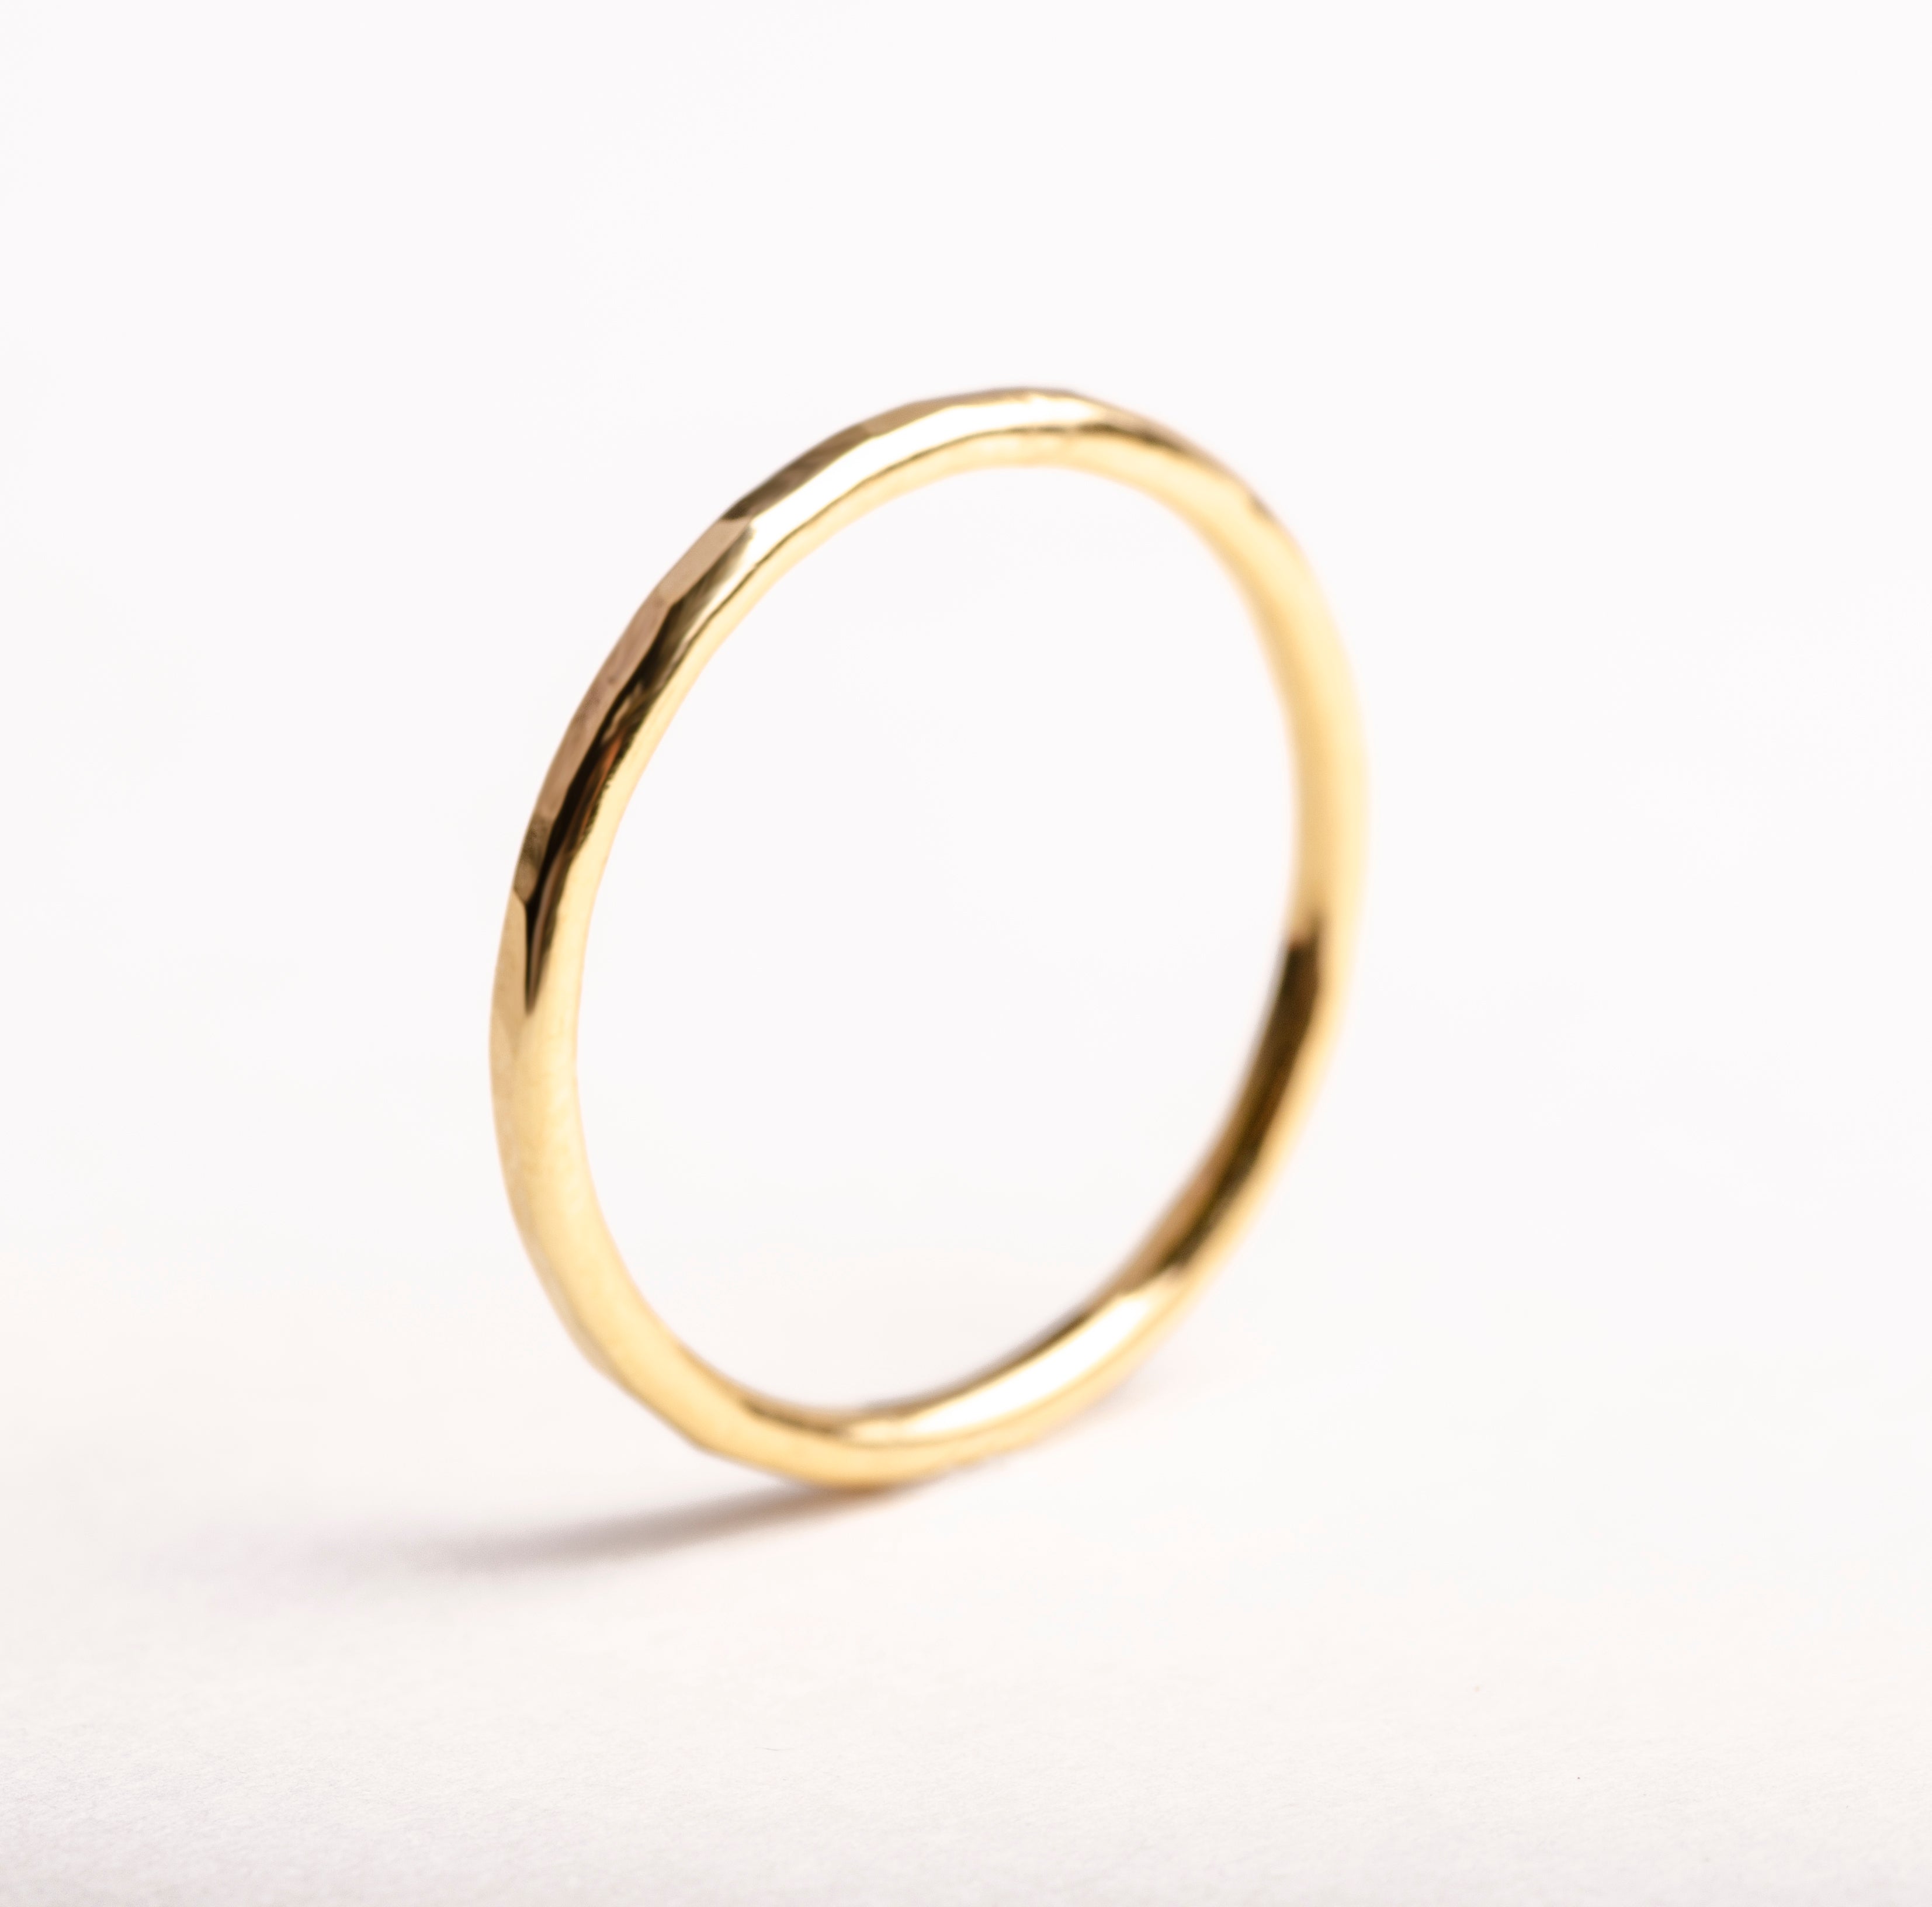 Ring hammered – Charlotte Wooning